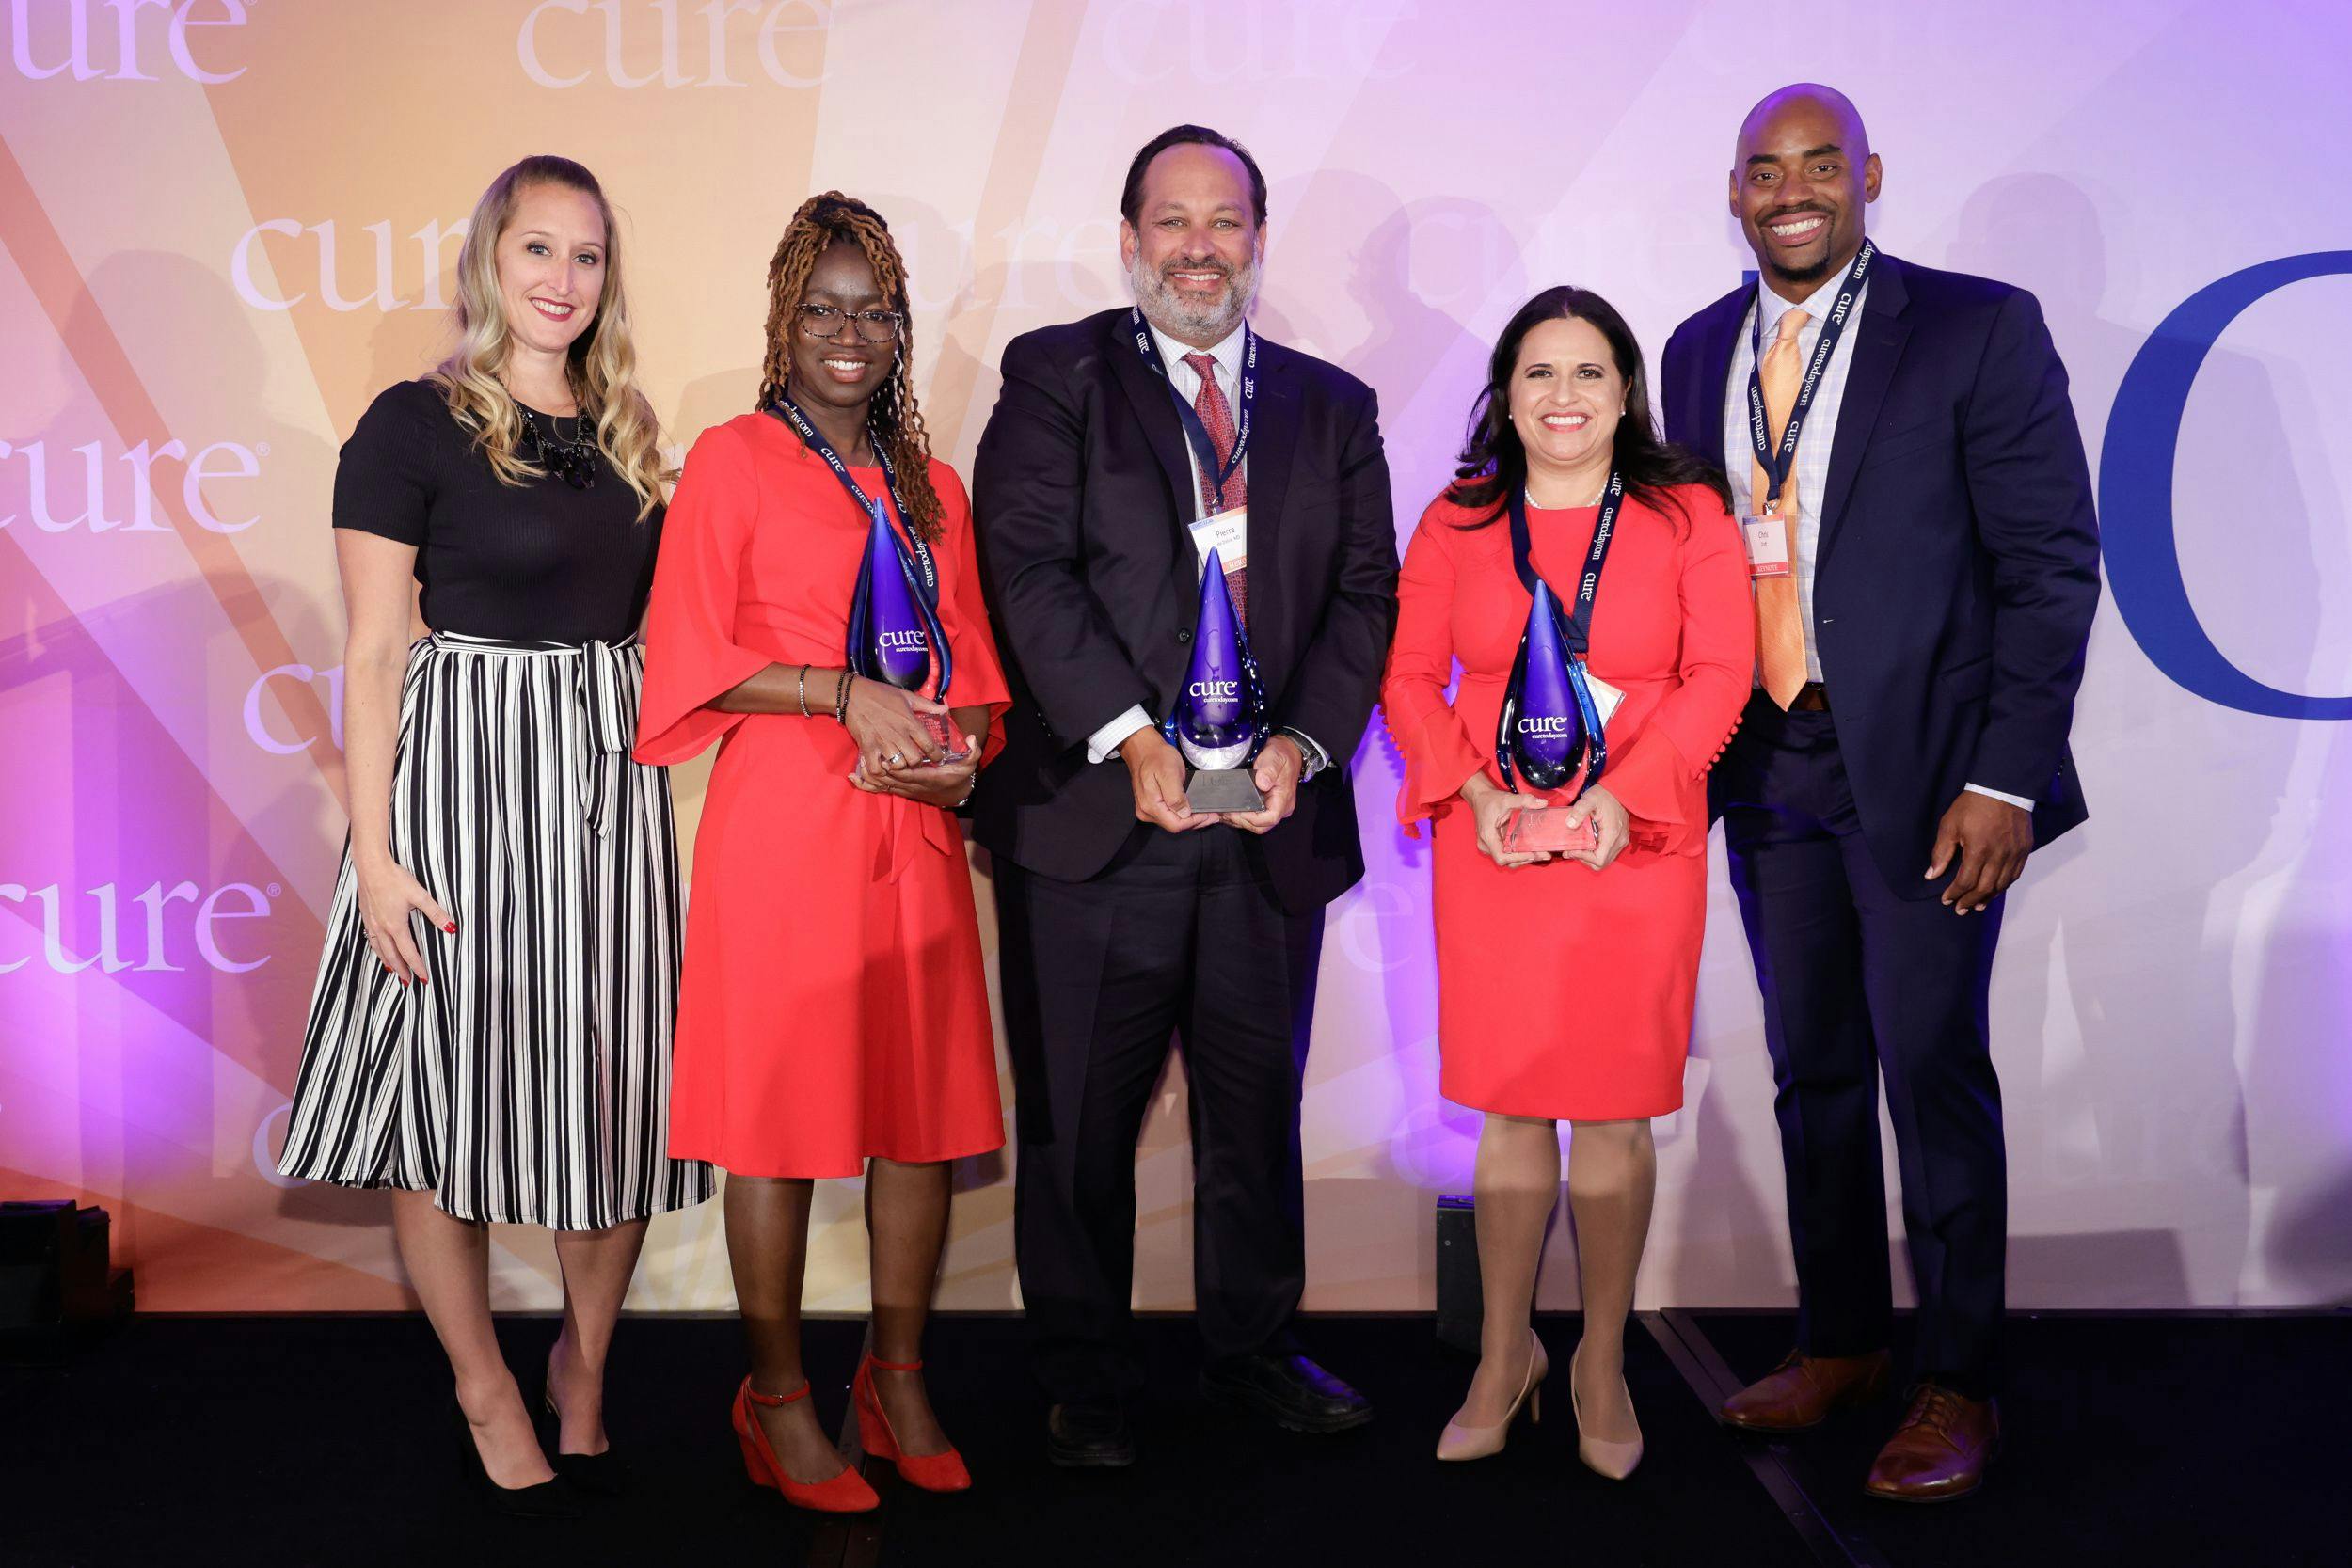 The recipients of CURE®’s third annual Lung Cancer Heroes® awards — Alesha Arnold (second from left), Dr. Pierre de Delva (center) and Dr. Estelamari Rodriguez (second from right) — pose with CURE®’s Vice President of Content, Kristie L. Kahl (left) and keynote speaker Chris Draft (right).